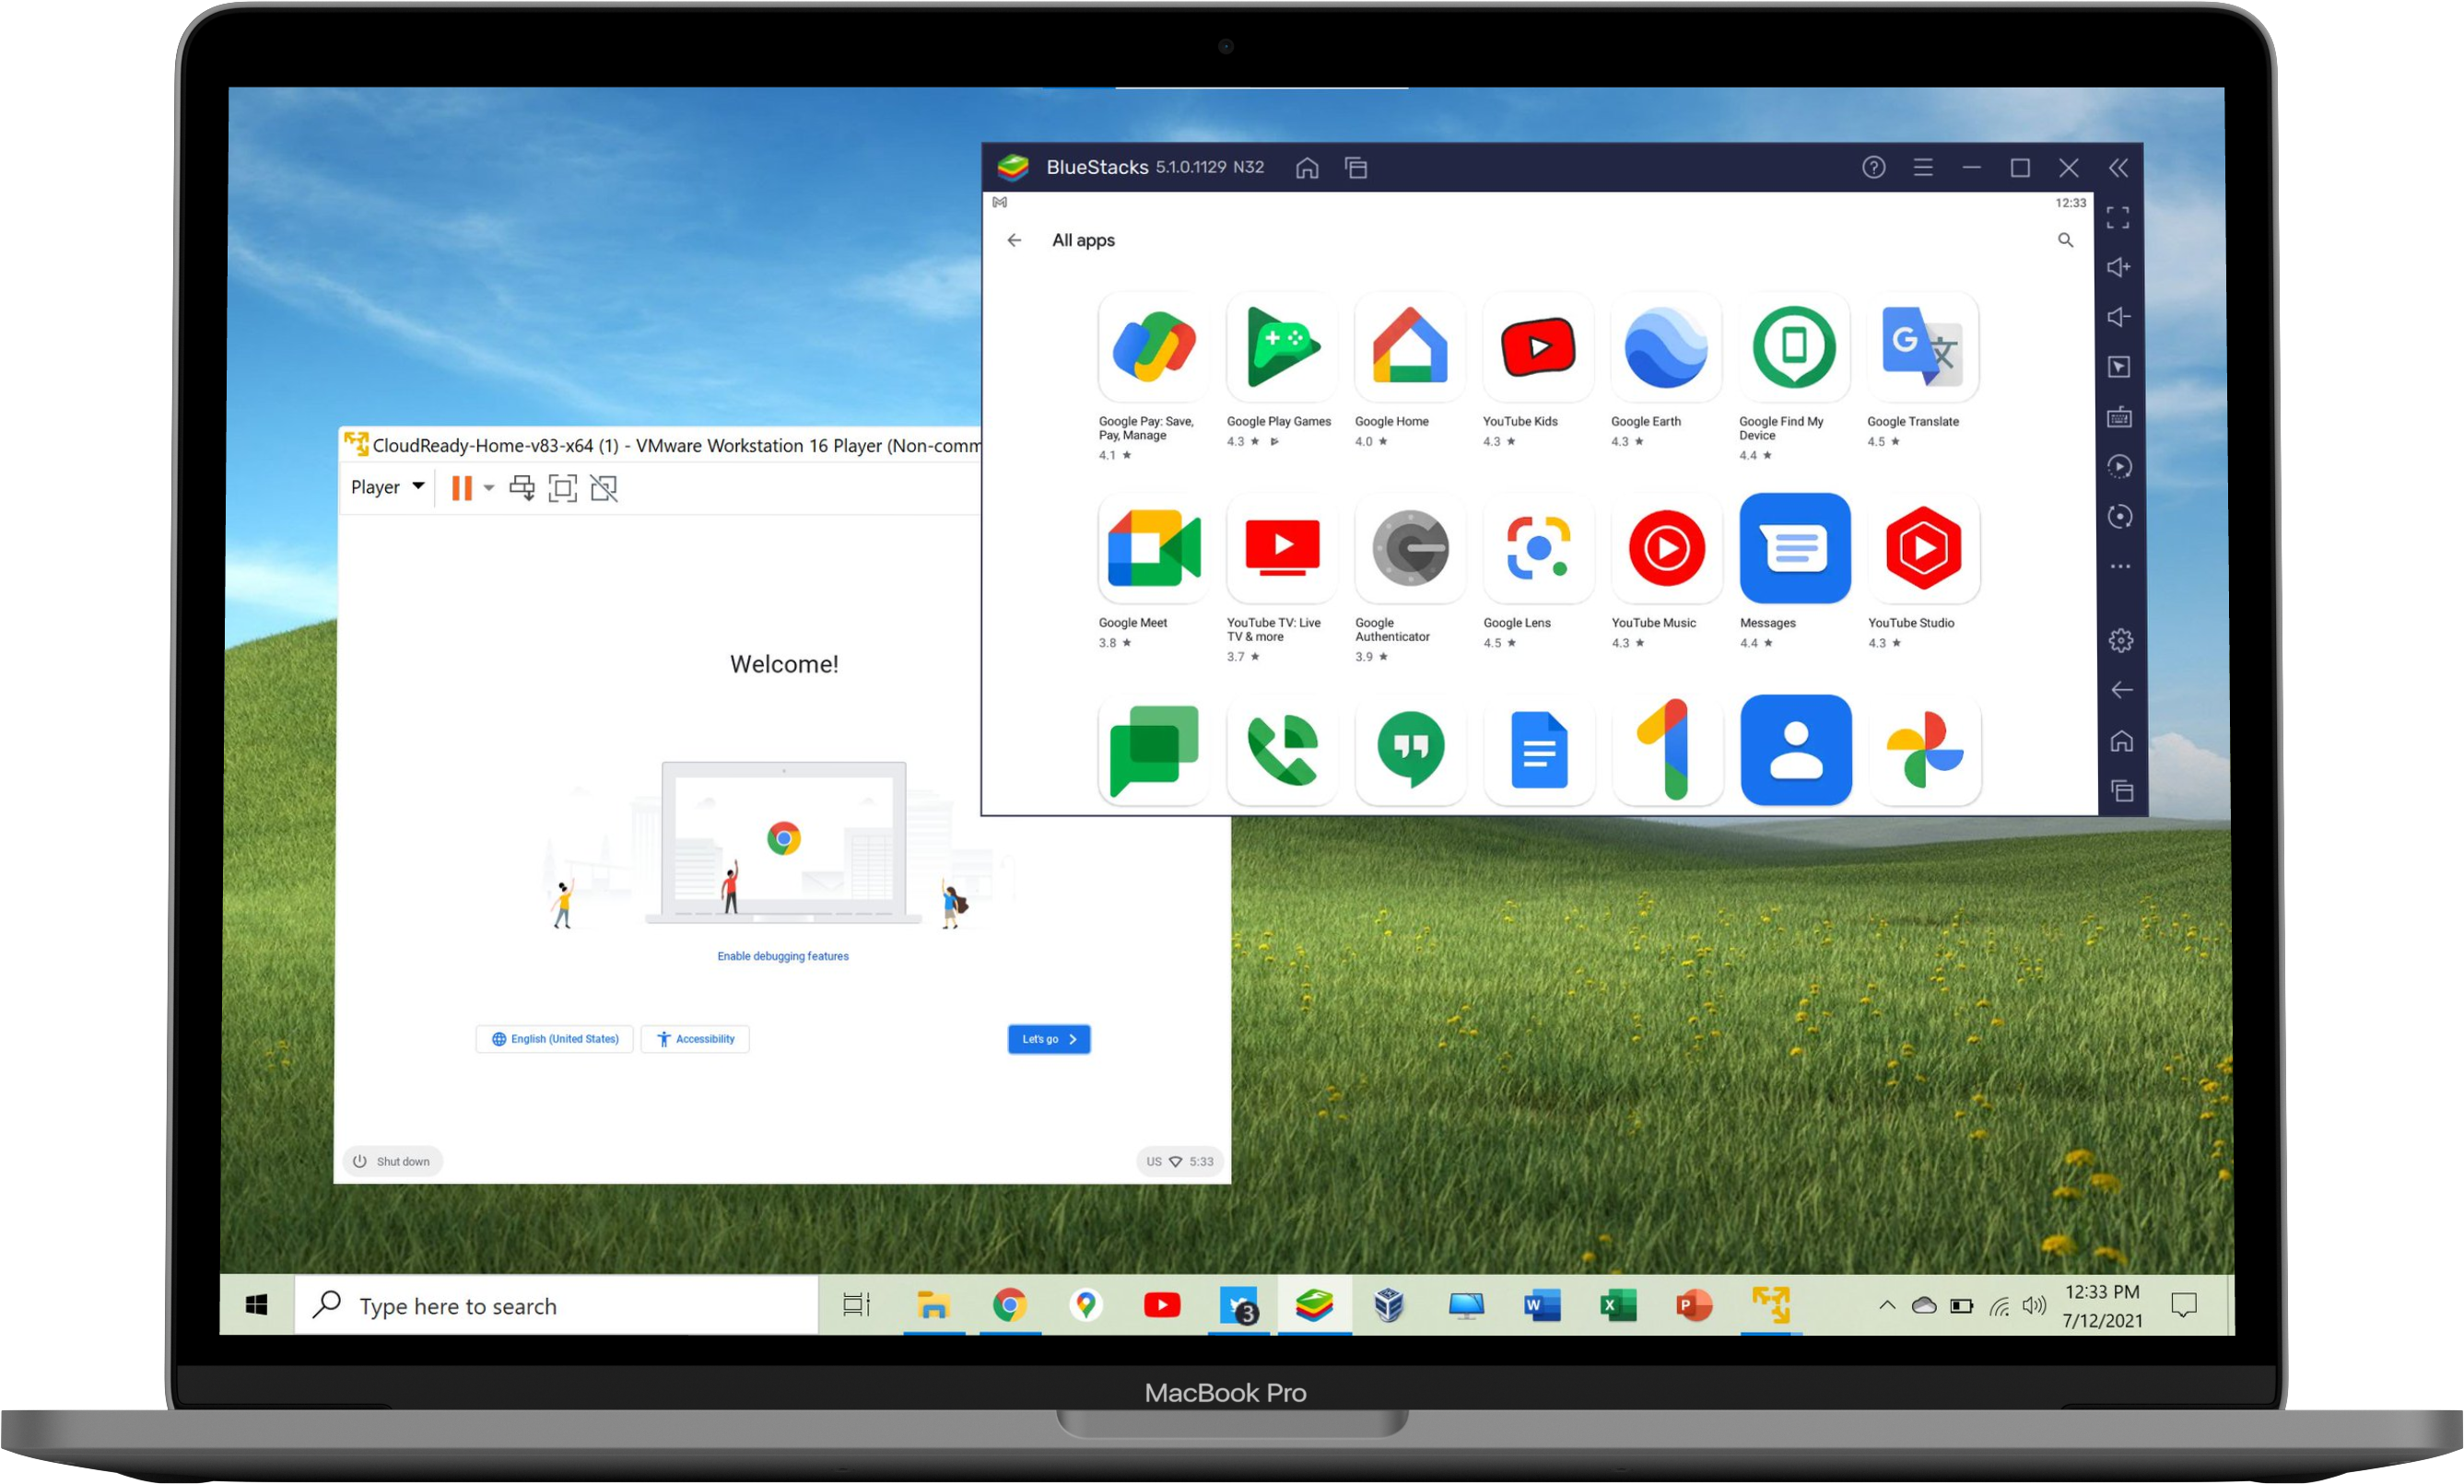 chrome os iso download for pc